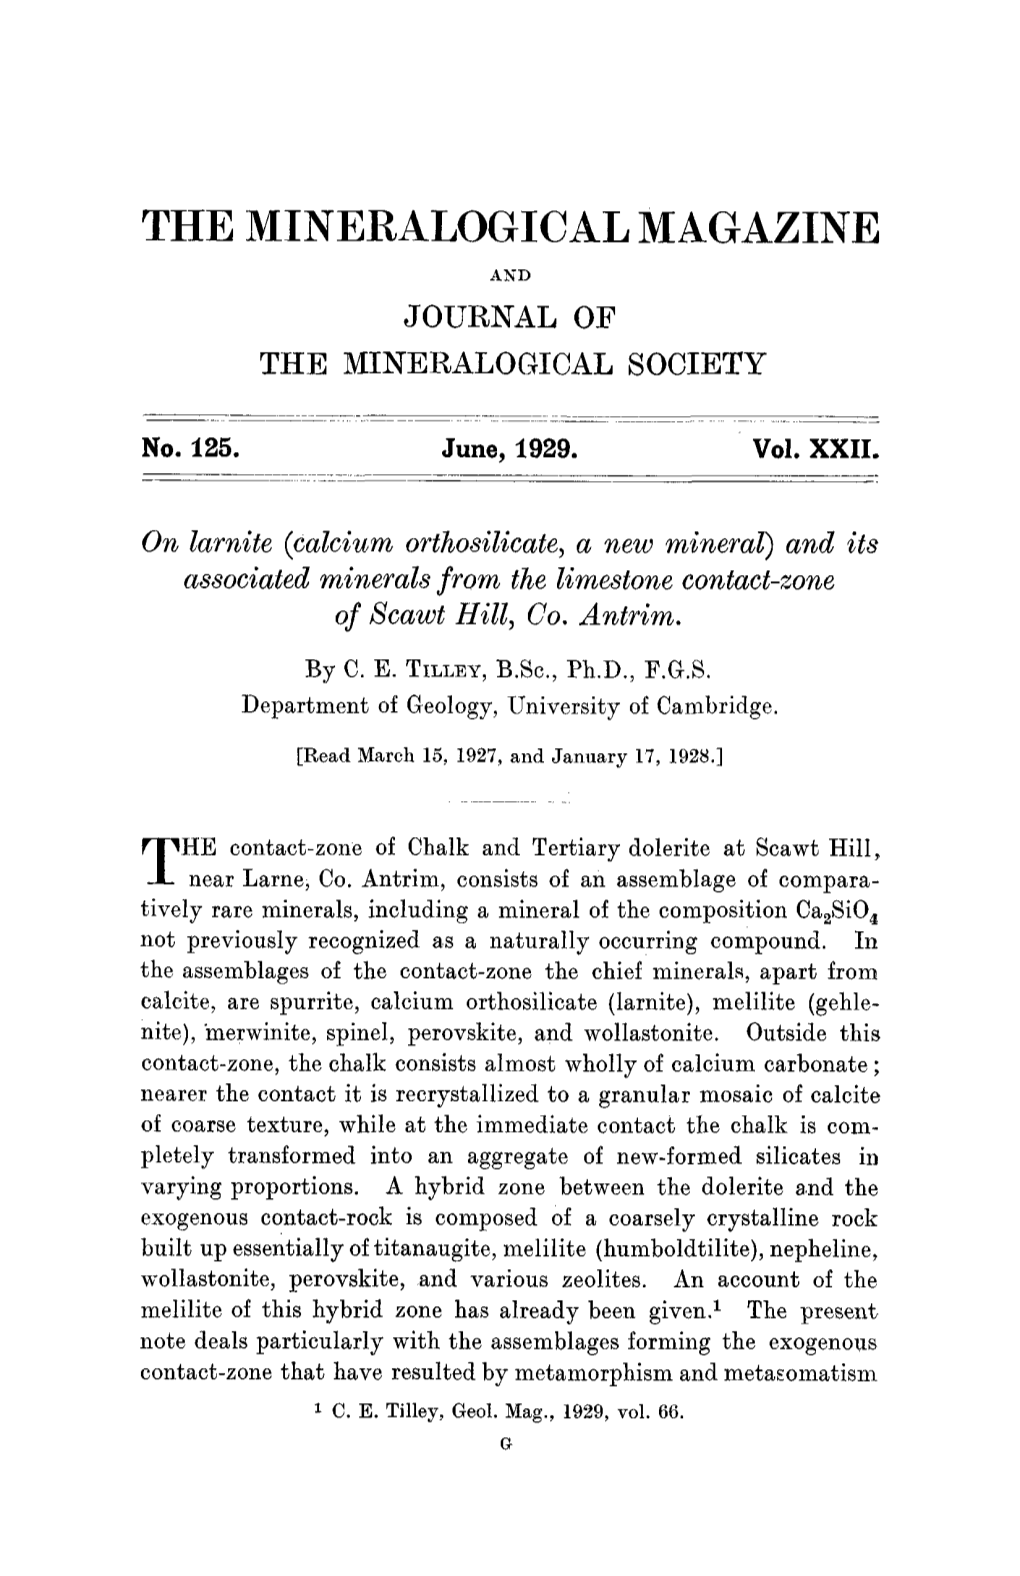 The Mineralogical Magazine A~'D Journal of the Mineralogical Society